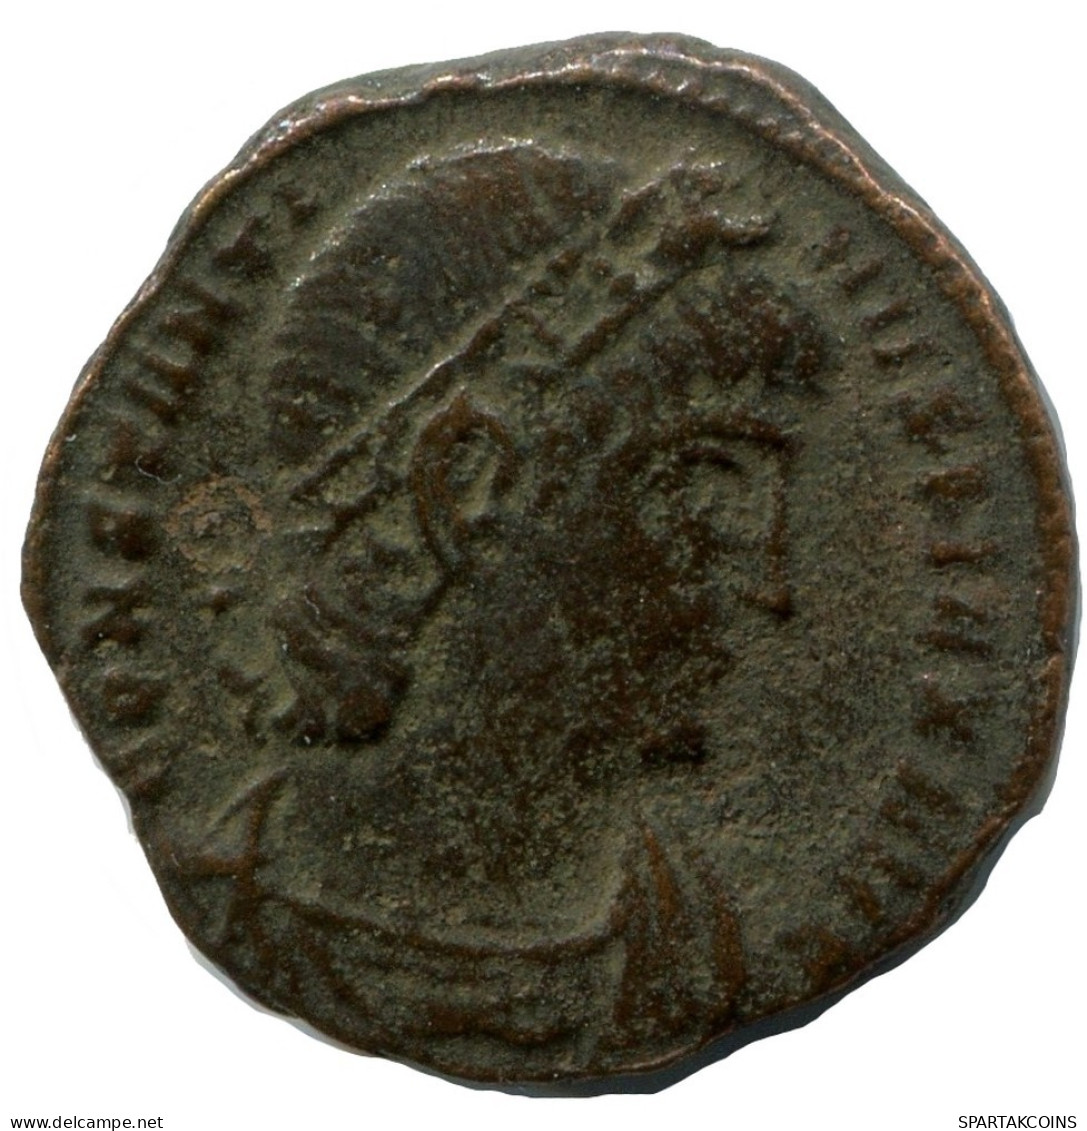 CONSTANTINE I MINTED IN CONSTANTINOPLE FOUND IN IHNASYAH HOARD #ANC10738.14.F.A - L'Empire Chrétien (307 à 363)